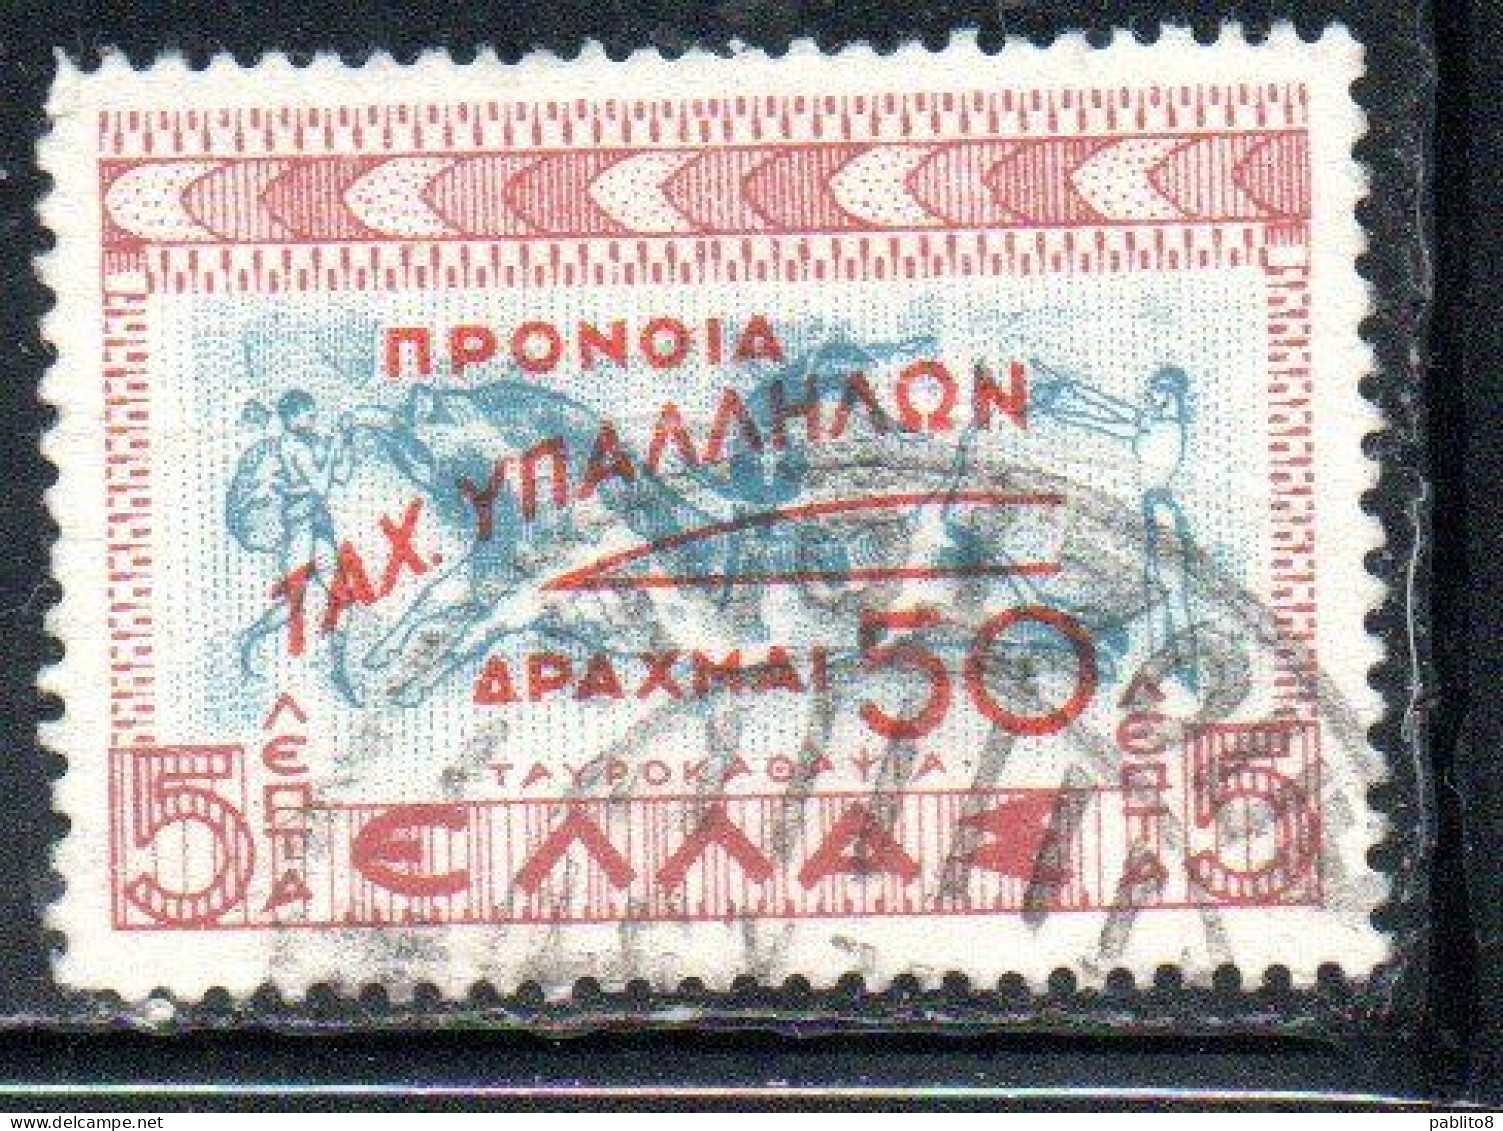 GREECE GRECIA ELLAS 1945 POSTAL TAX STAMPS WELFARE FUND SURCHARGED 50d On 5l USED USATO OBLITERE' - Fiscali